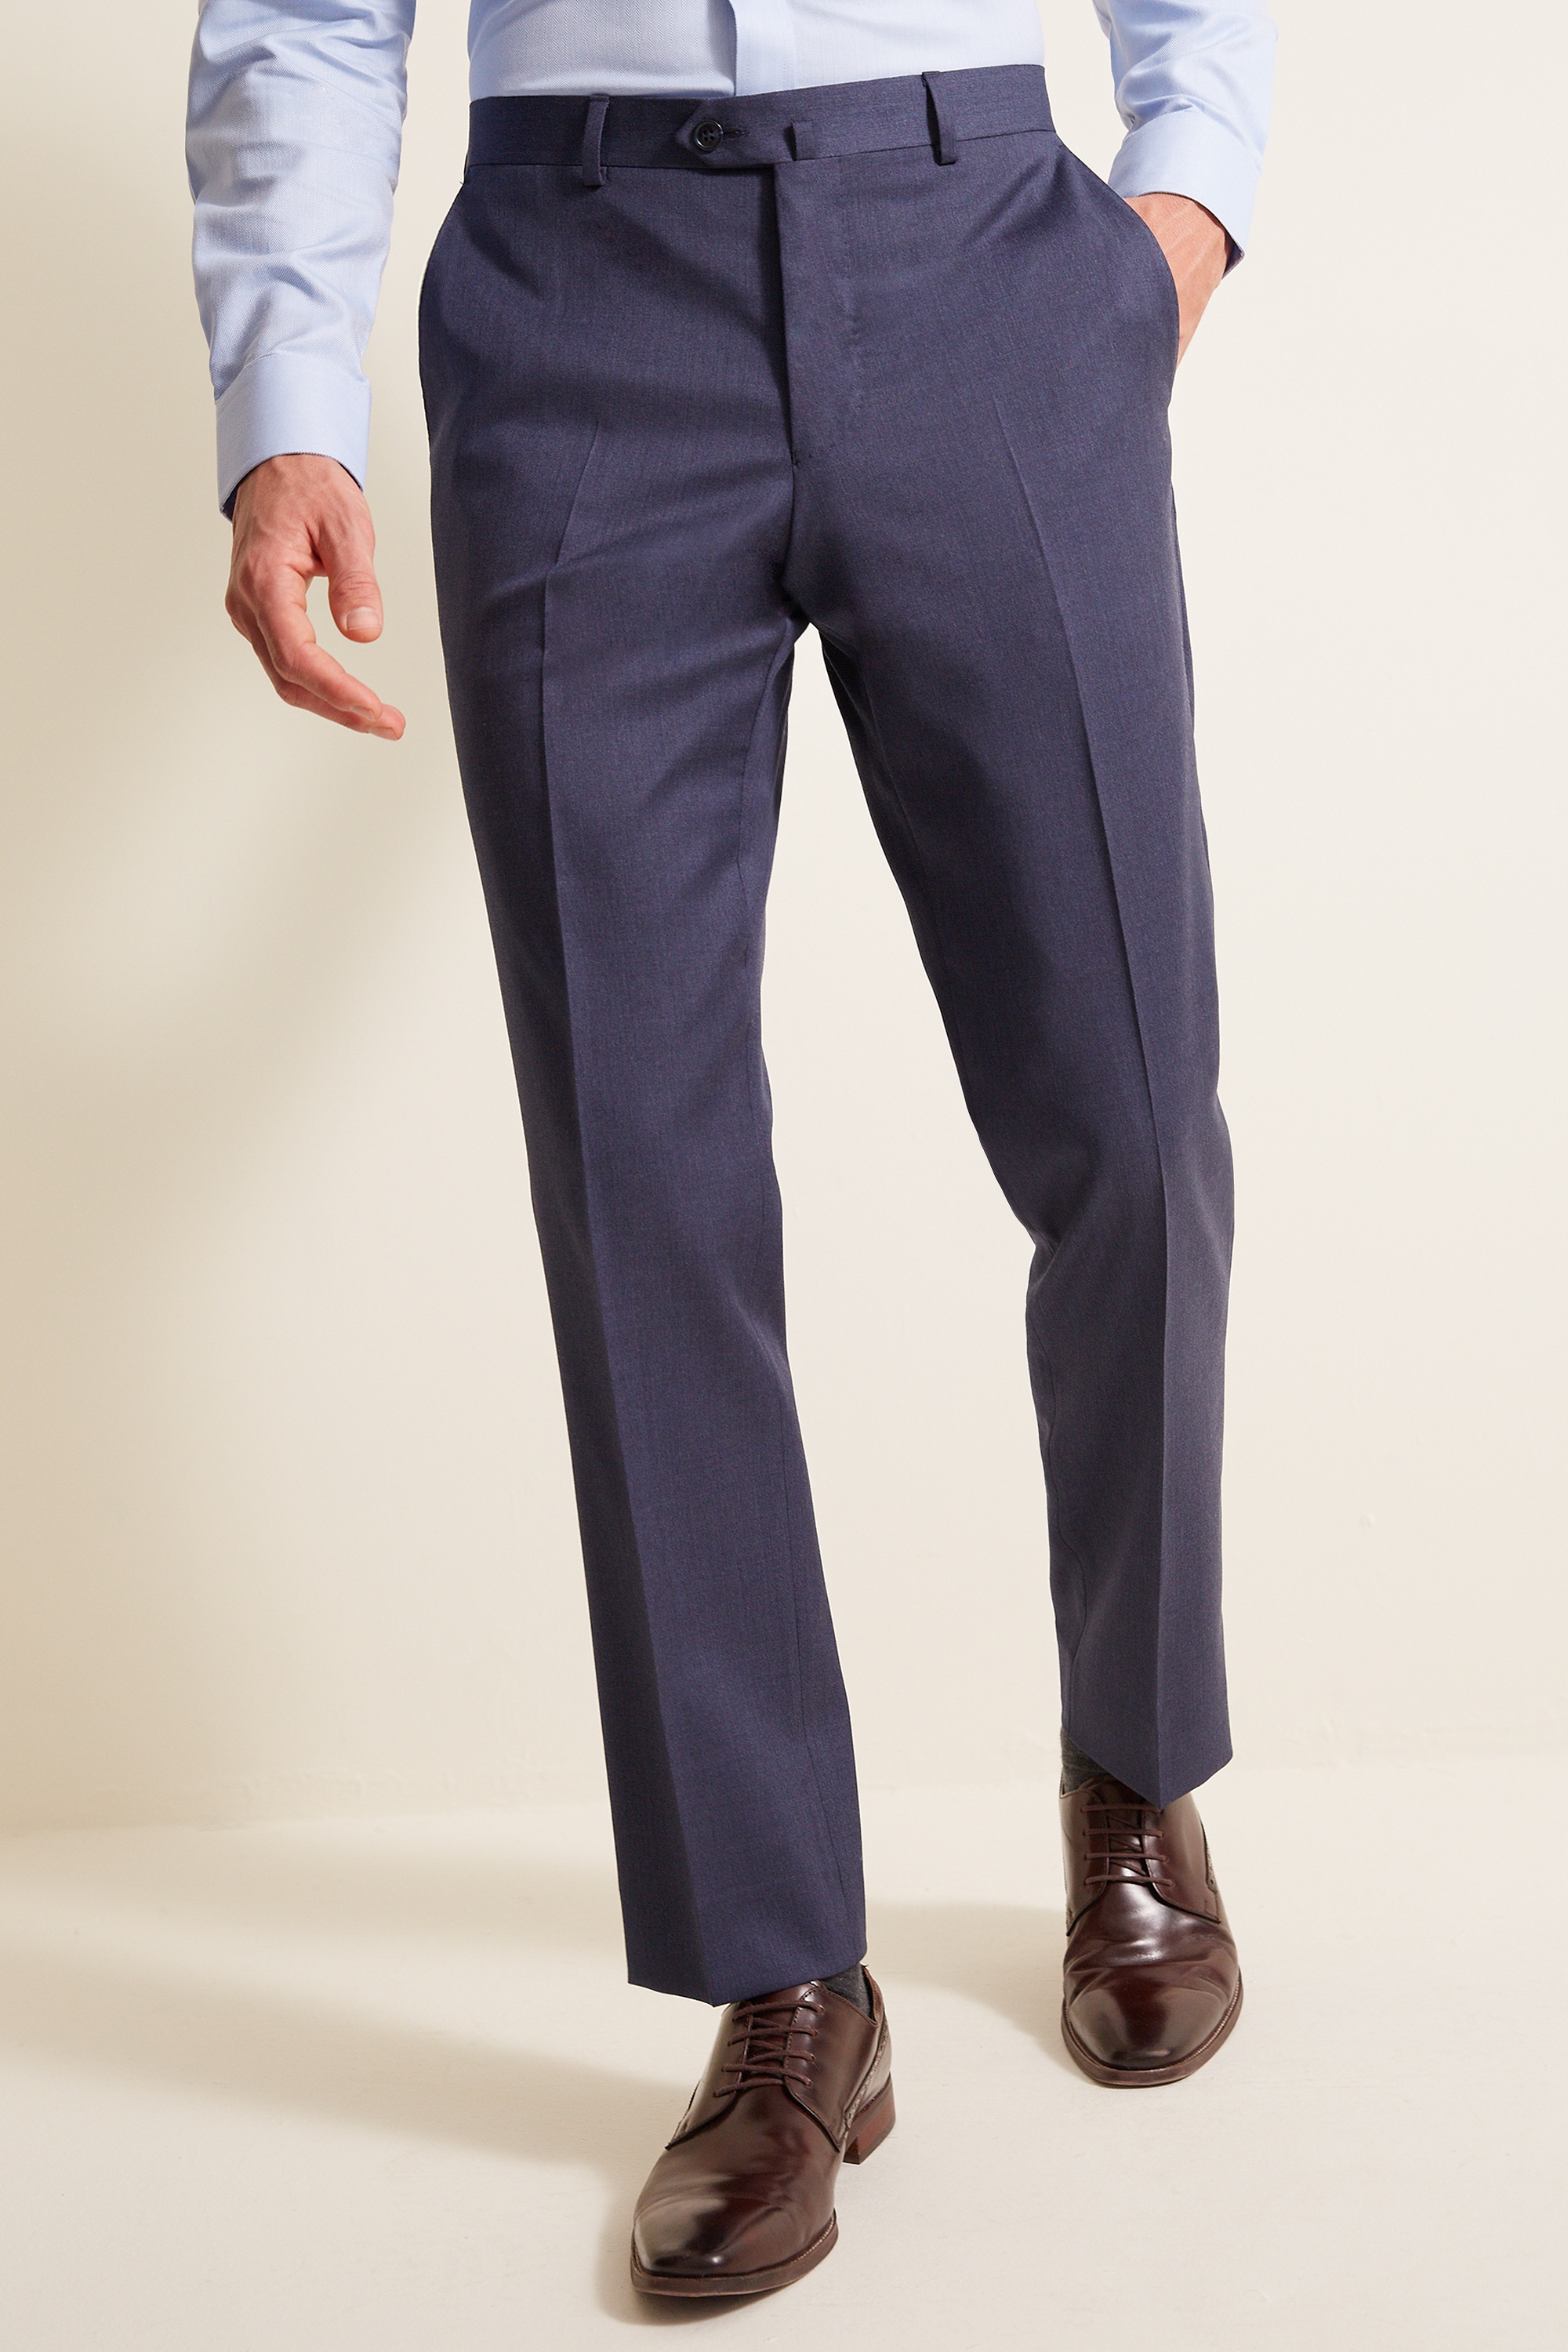 STG Exclusive Tailored Fit Airforce Blue Twill Trousers